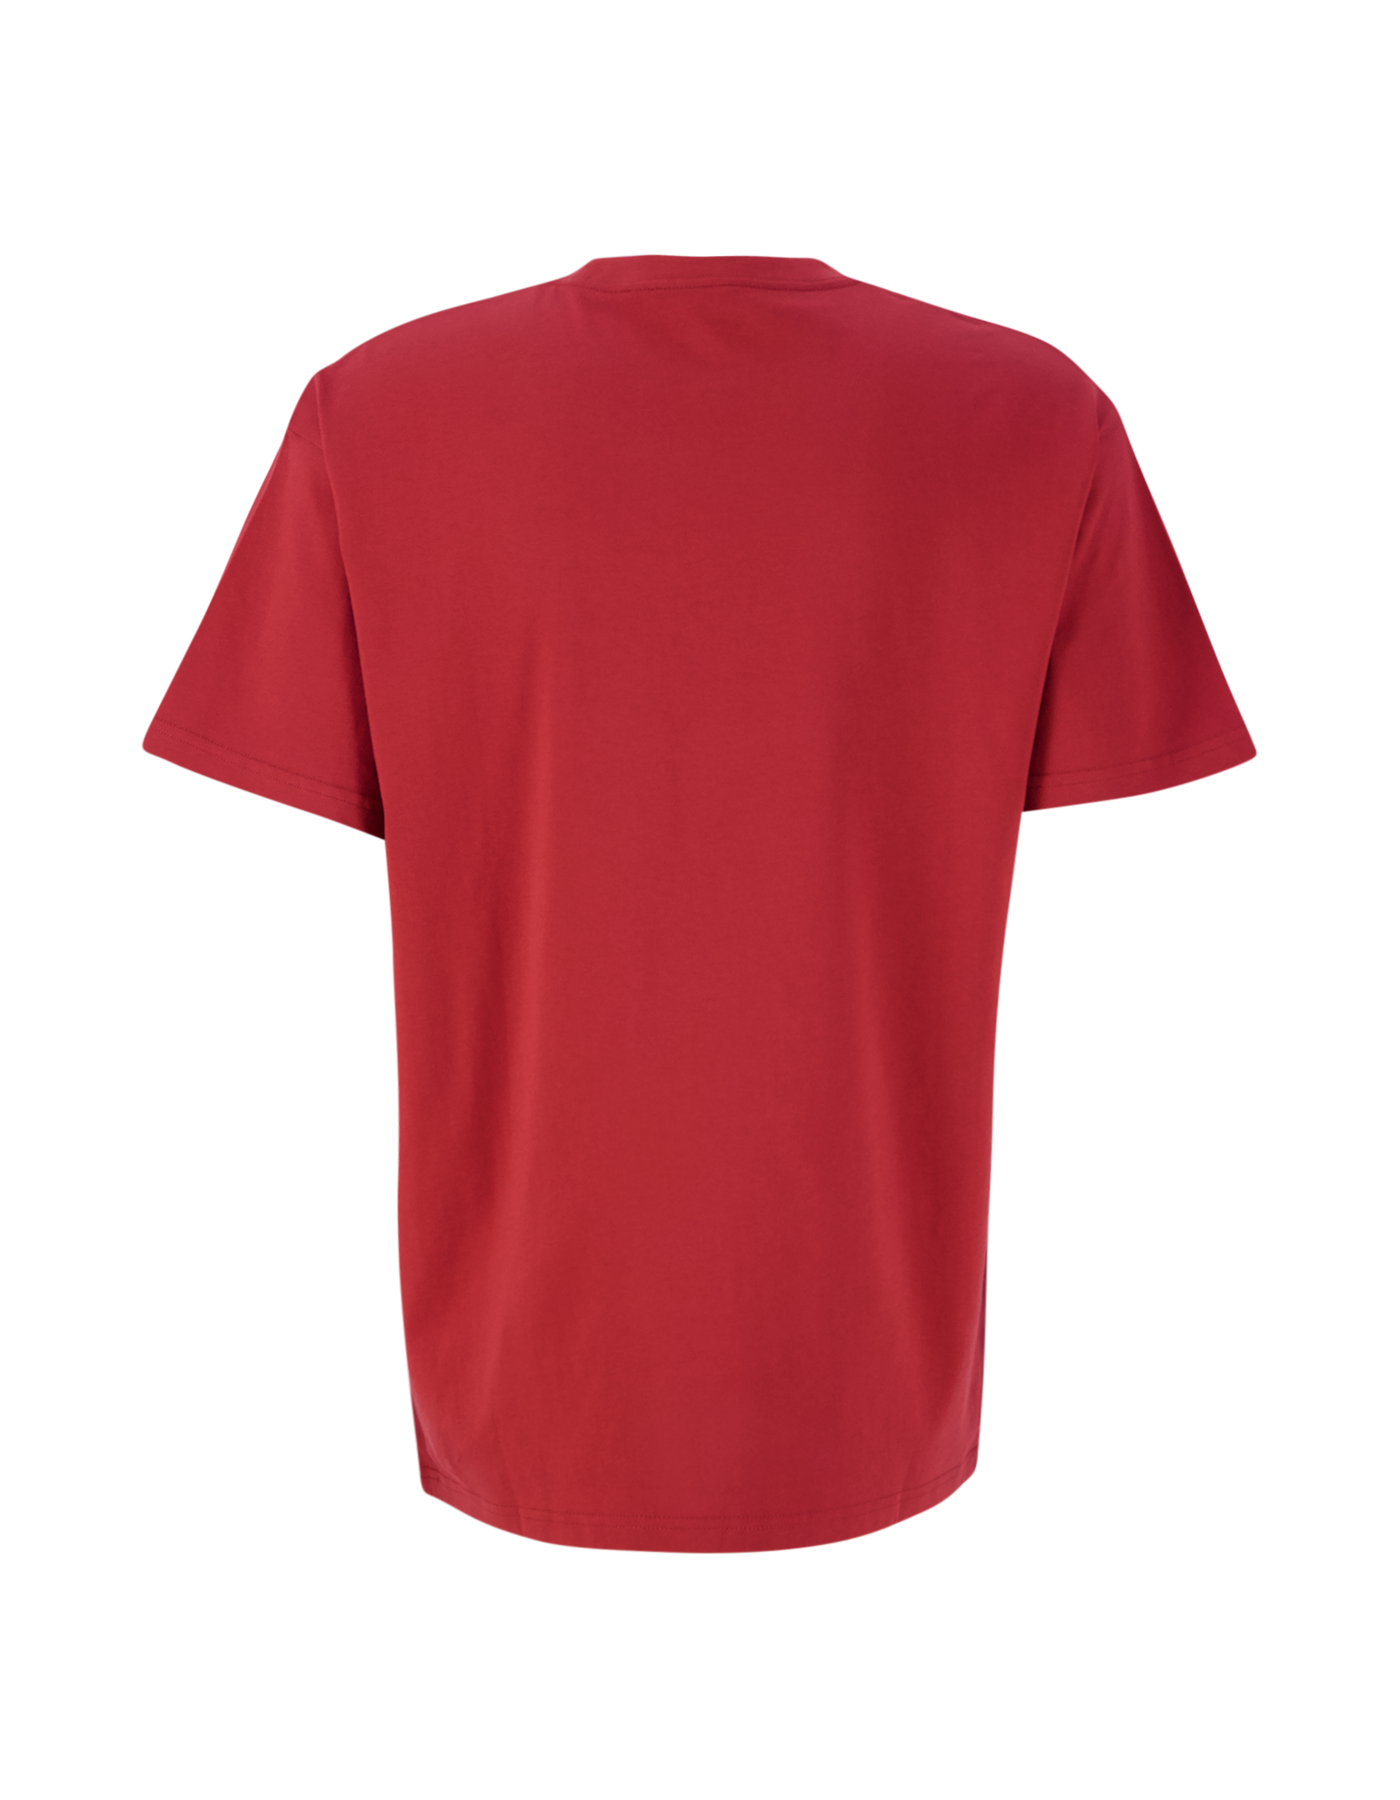 Carhartt WIP S/S Amour Pocket T-Shirt ROOD 2